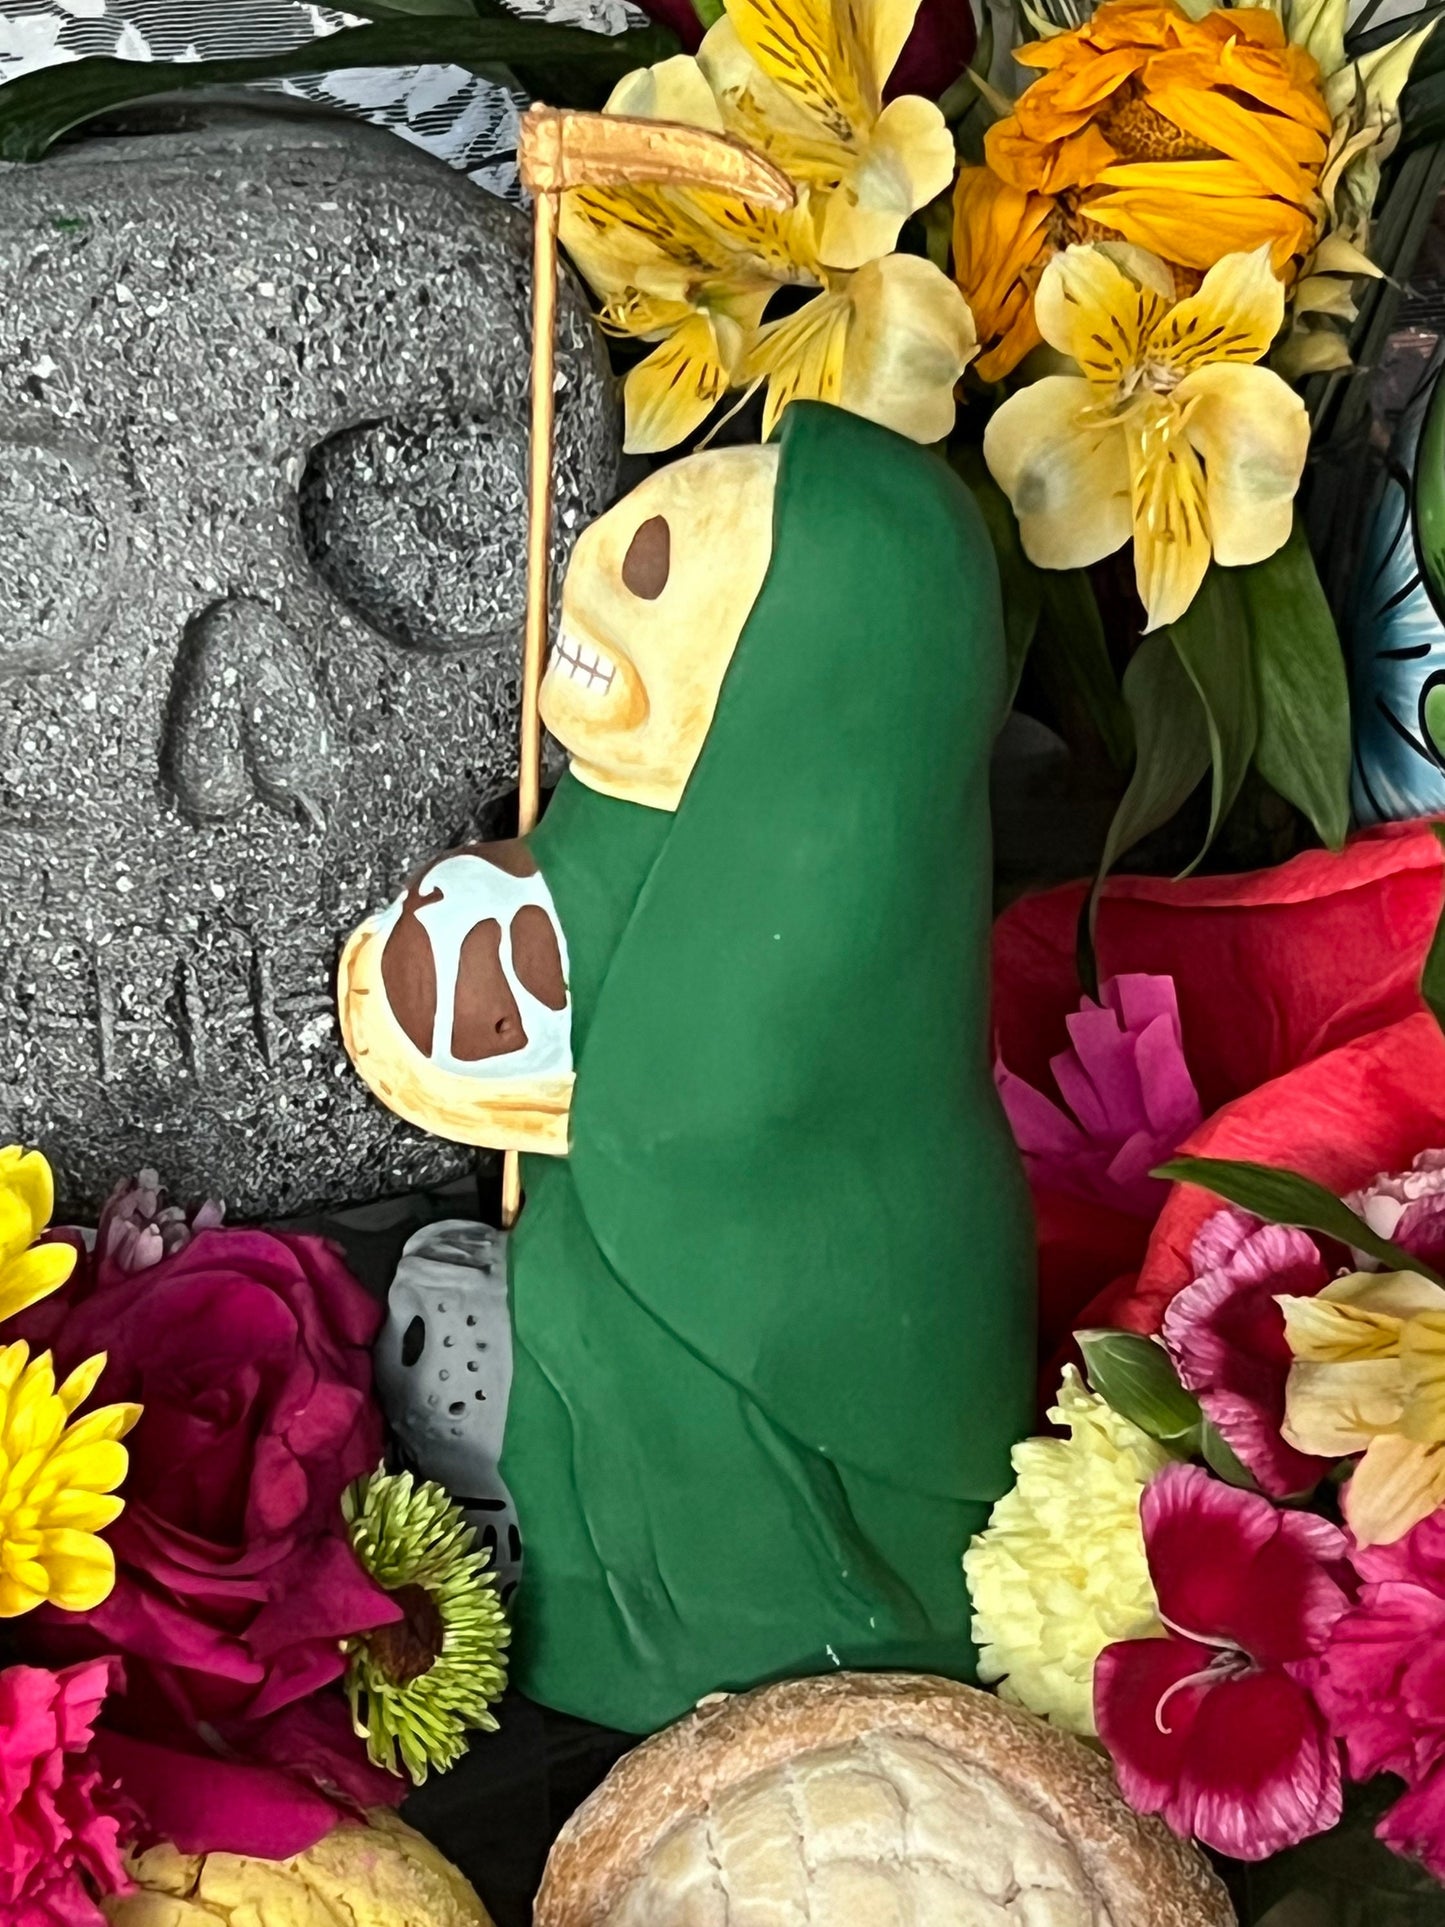 Santa Muerte Verde Statue + Green + Mictecacihuatl + Mictlantecihuatl + Traditionally Handcrafted from Mexican Clay + One of a Kind